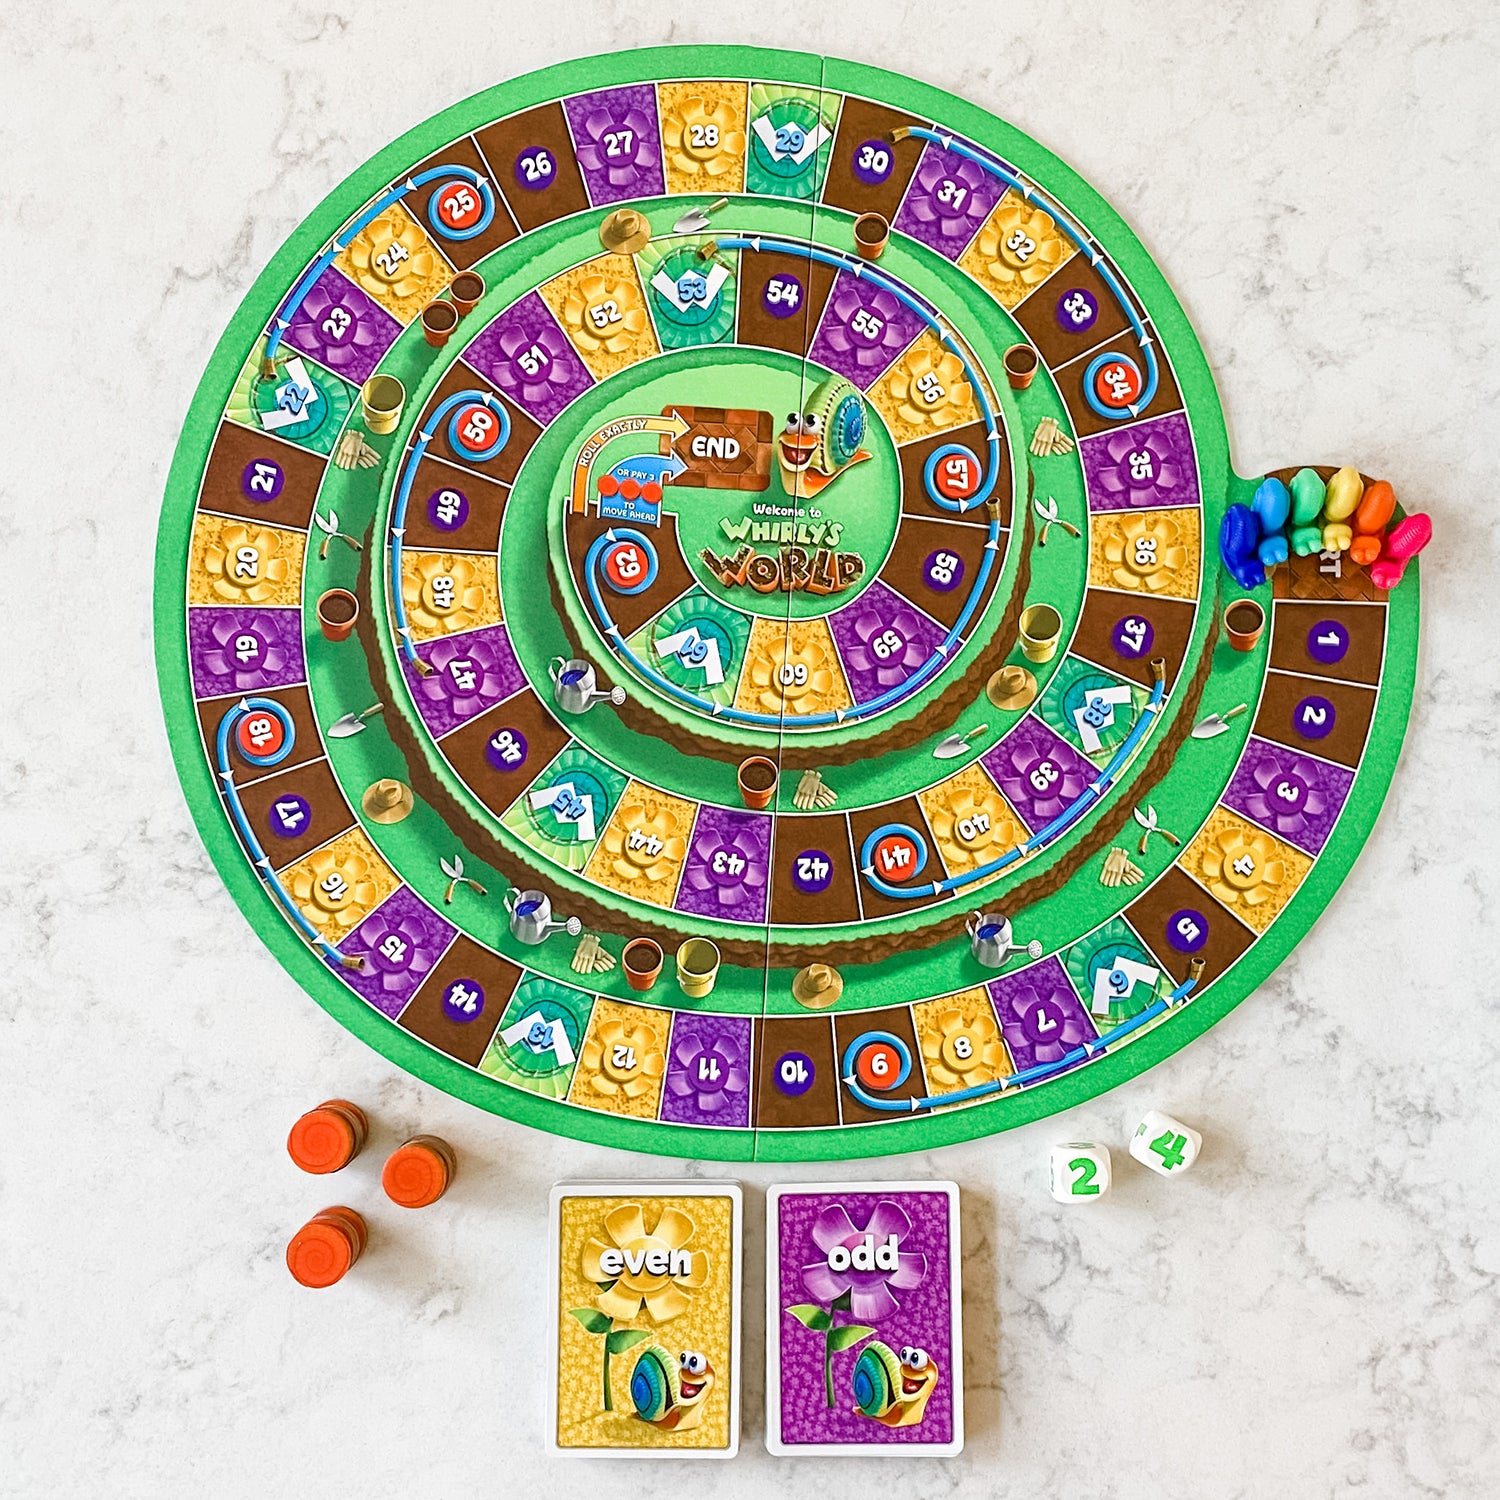 Whirly's World by SimplyFun is a great math game to practice even and odd numbers, addition, and counting for ages 6 and up